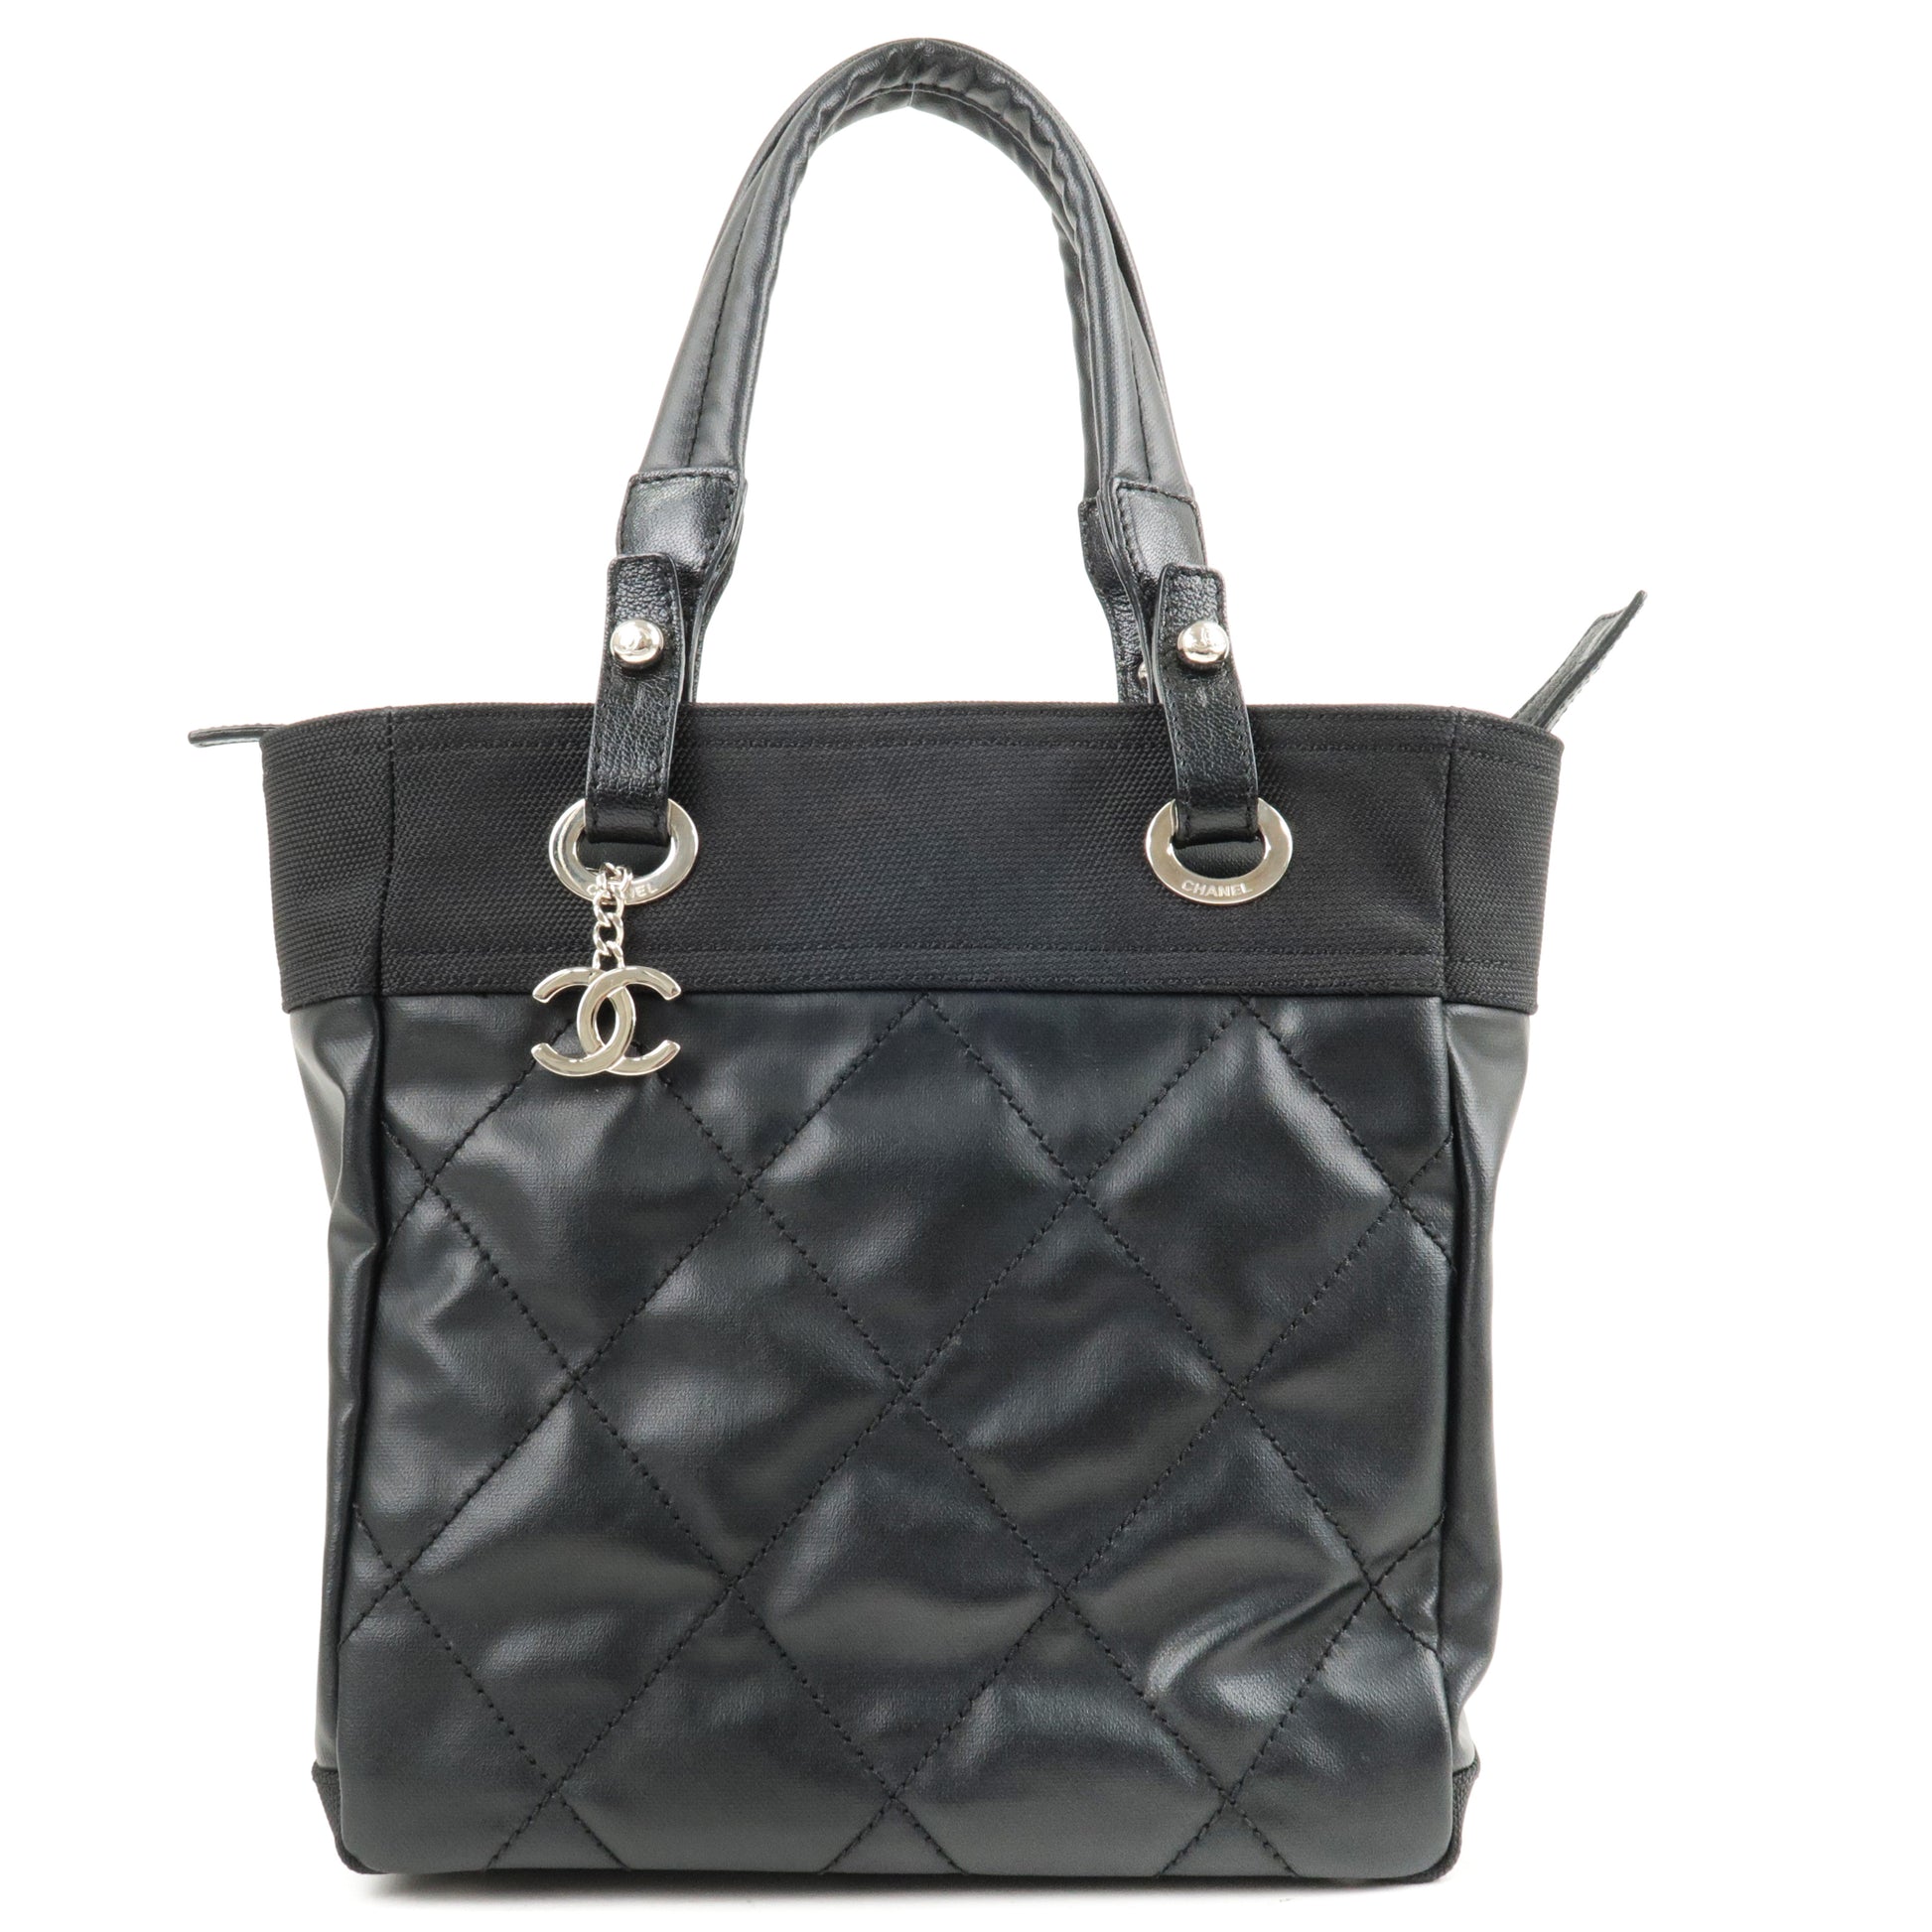 Deauville - Line - Chanel Gabrielle Small Hobo Bag - Tote - MM